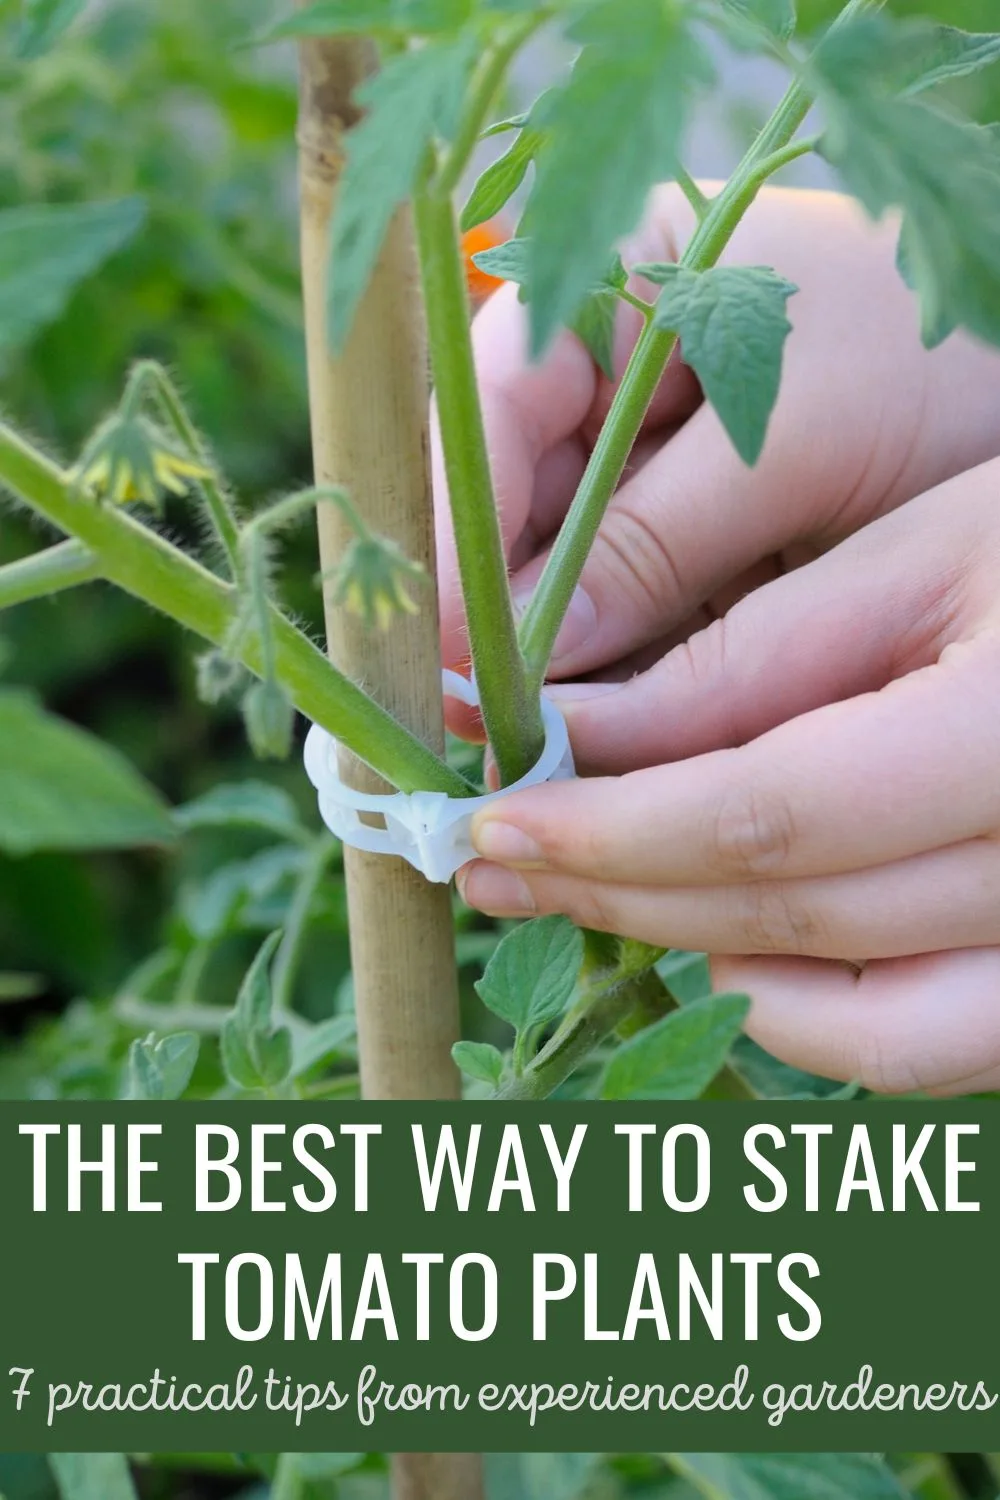 The best way to stake tomato plants: 7 practical tips from experienced gardeners.